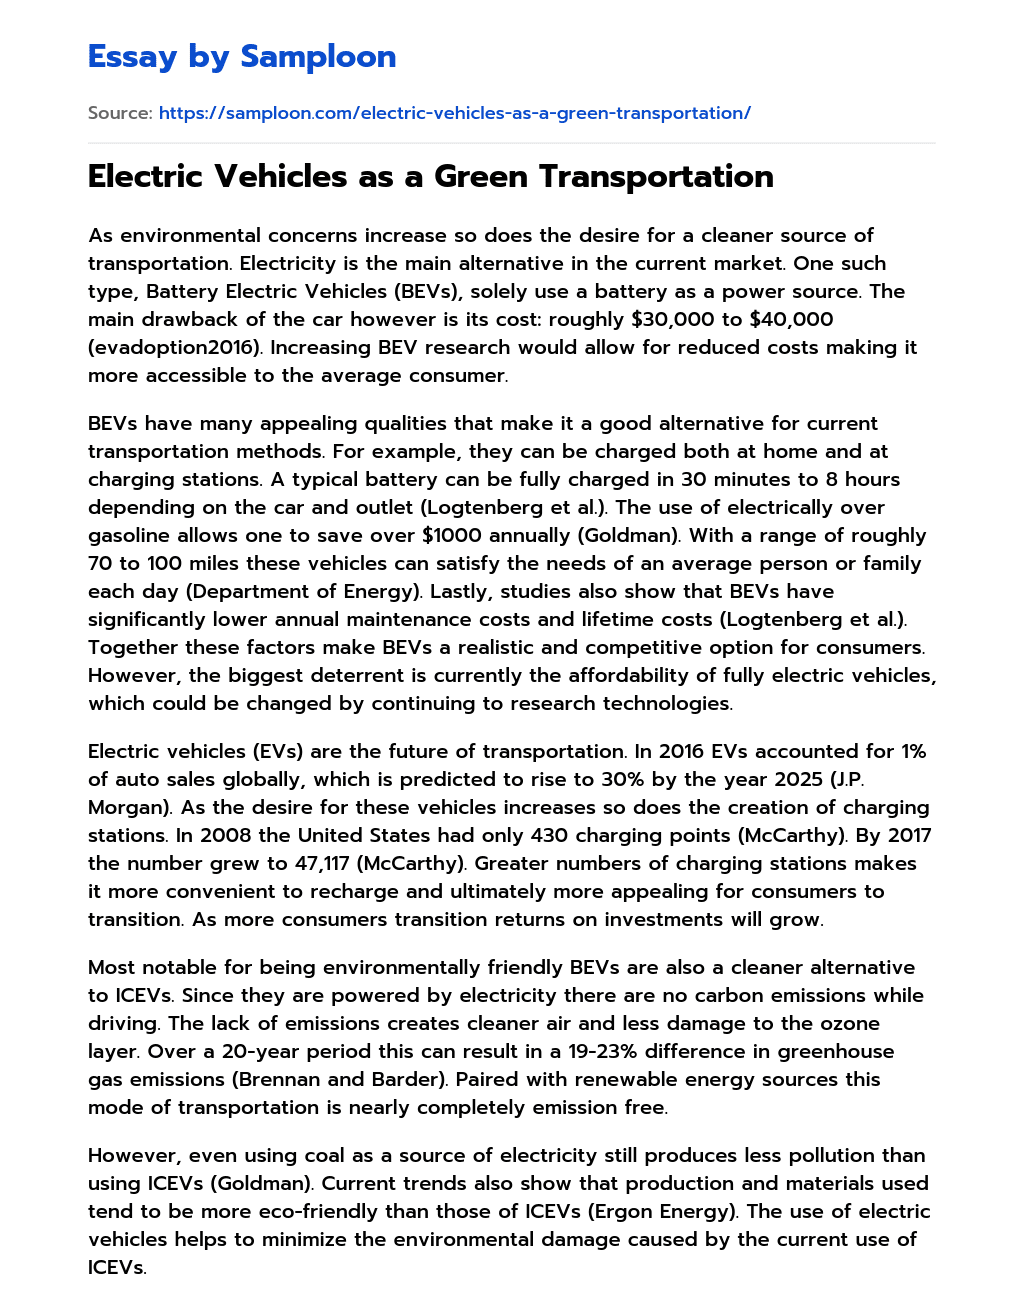 Electric Vehicles as a Green Transportation essay